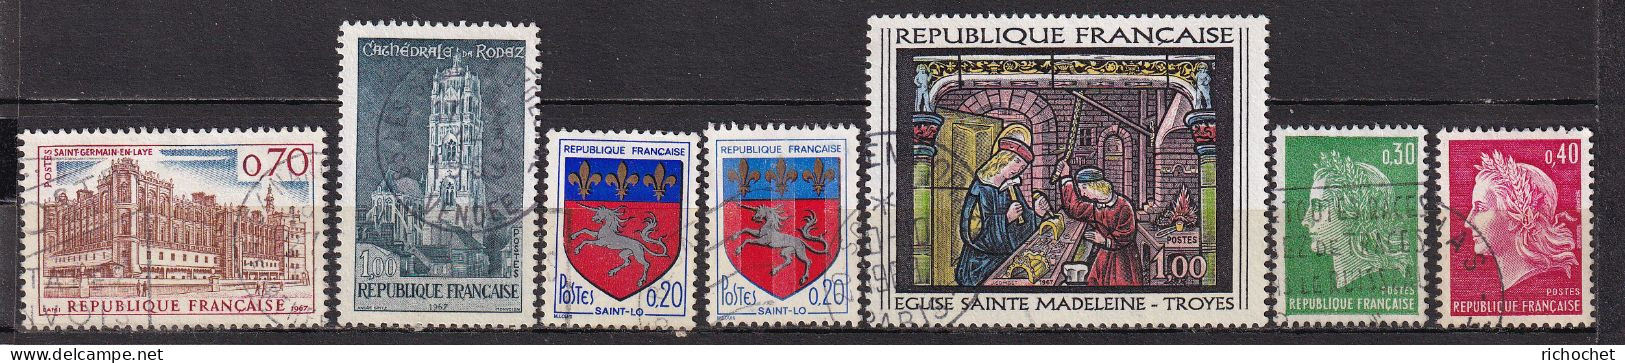 France 1501 + 1504 + 1510 + 1510c + 1531 + 1536 A + 1536 B ° - Used Stamps